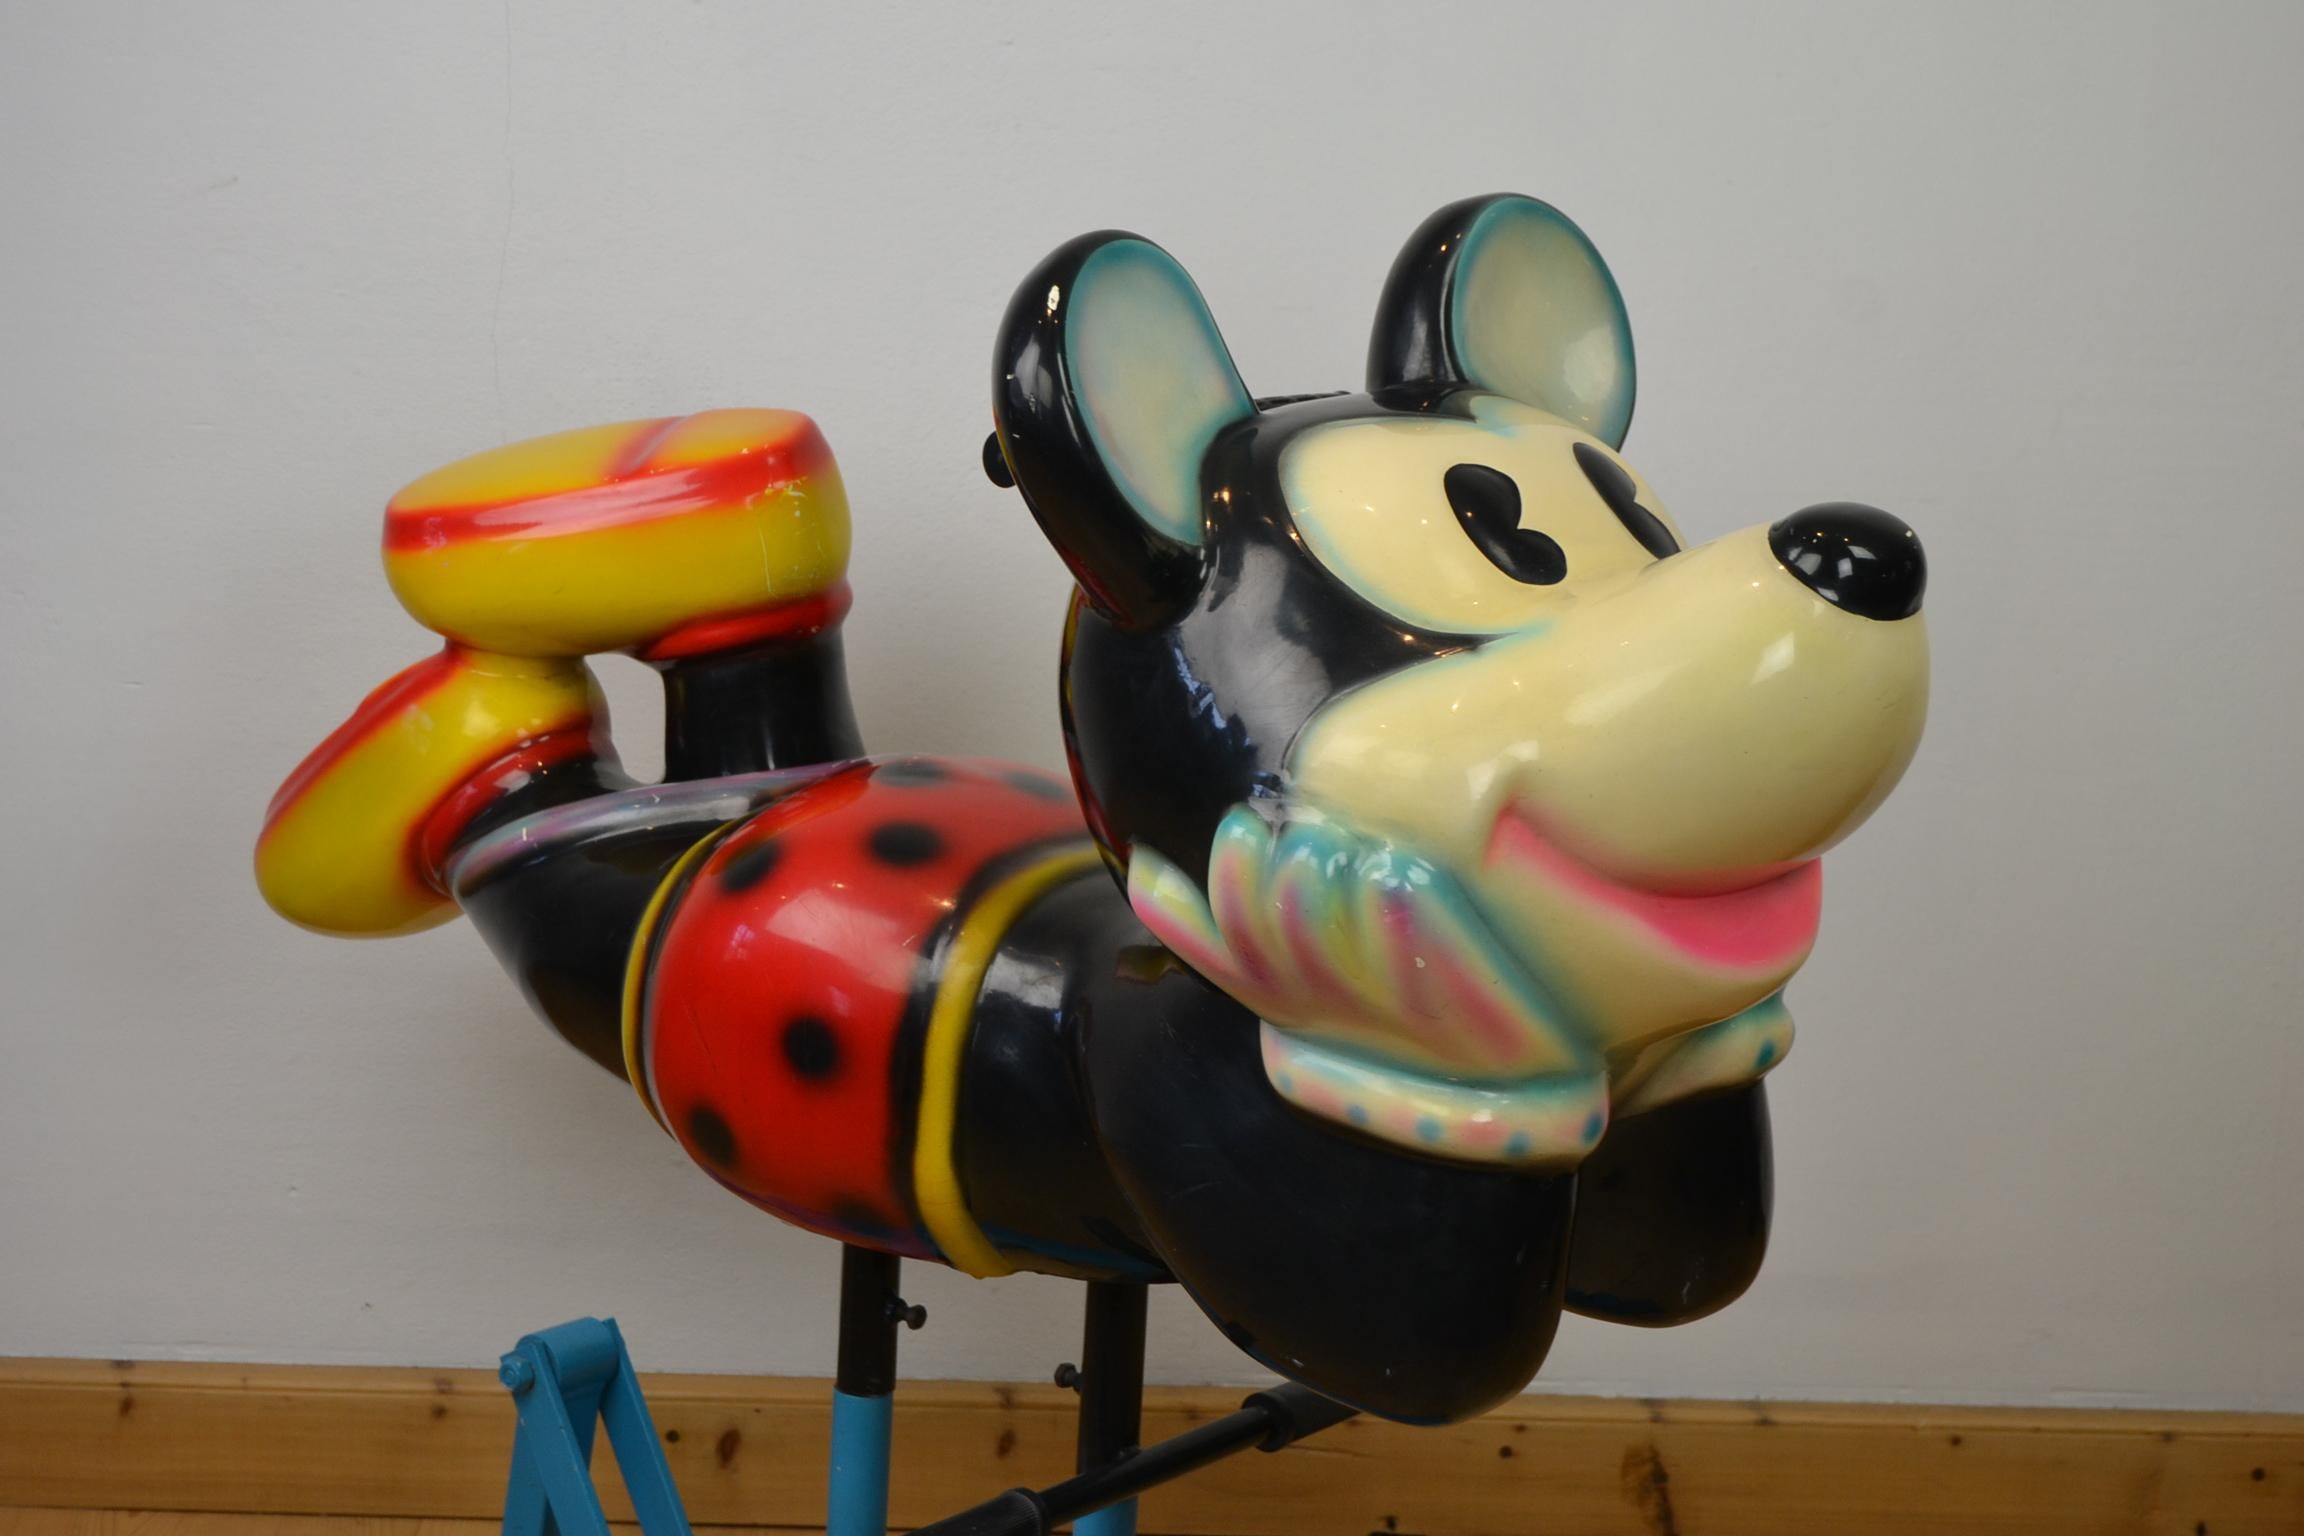 Mickey Mouse carousel figure or mickey mouse seat. 
This carousel seat is in the shape of the well-known animated cartoon Disney character Mickey Mouse or Mickey
which is mounted on an iron swing. The Mickey Mouse figurine is made of polyester.